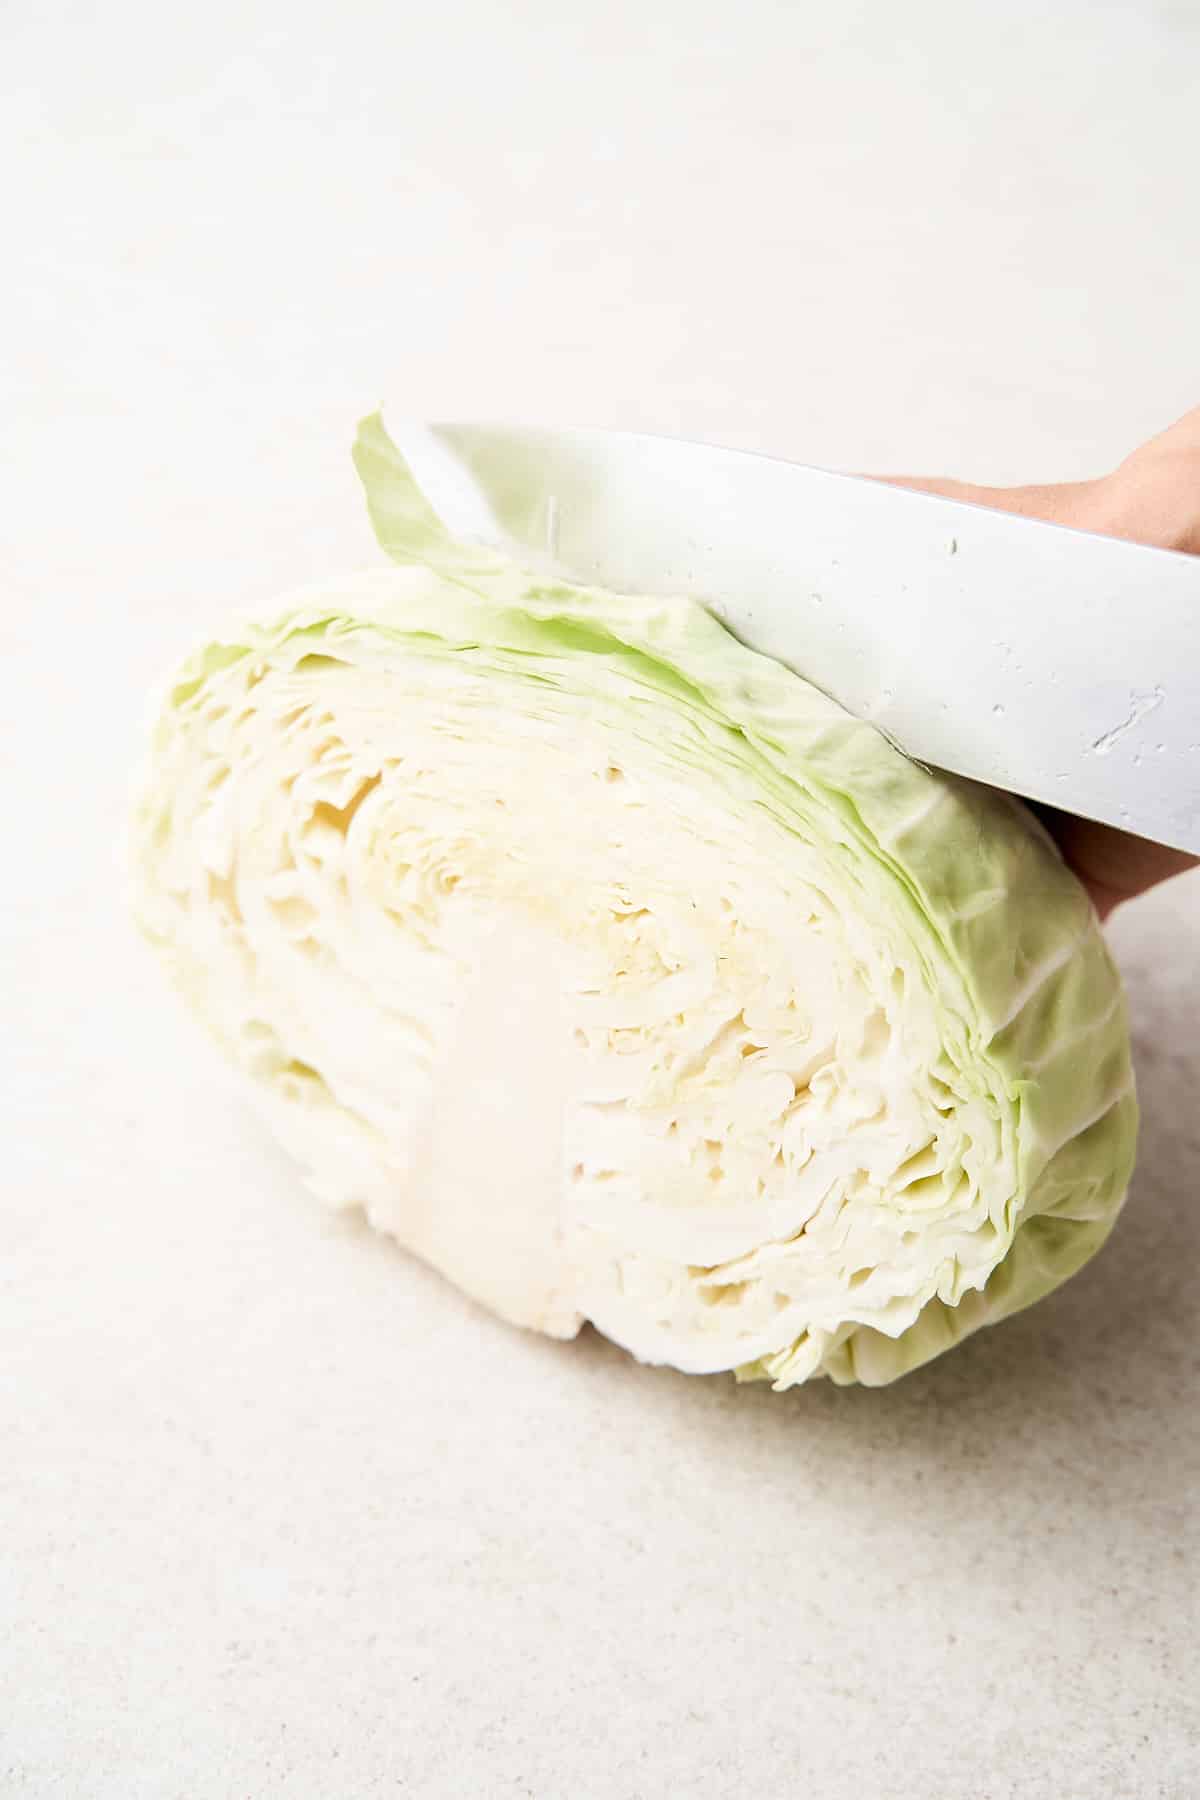 Cutting cabbage into steaks.